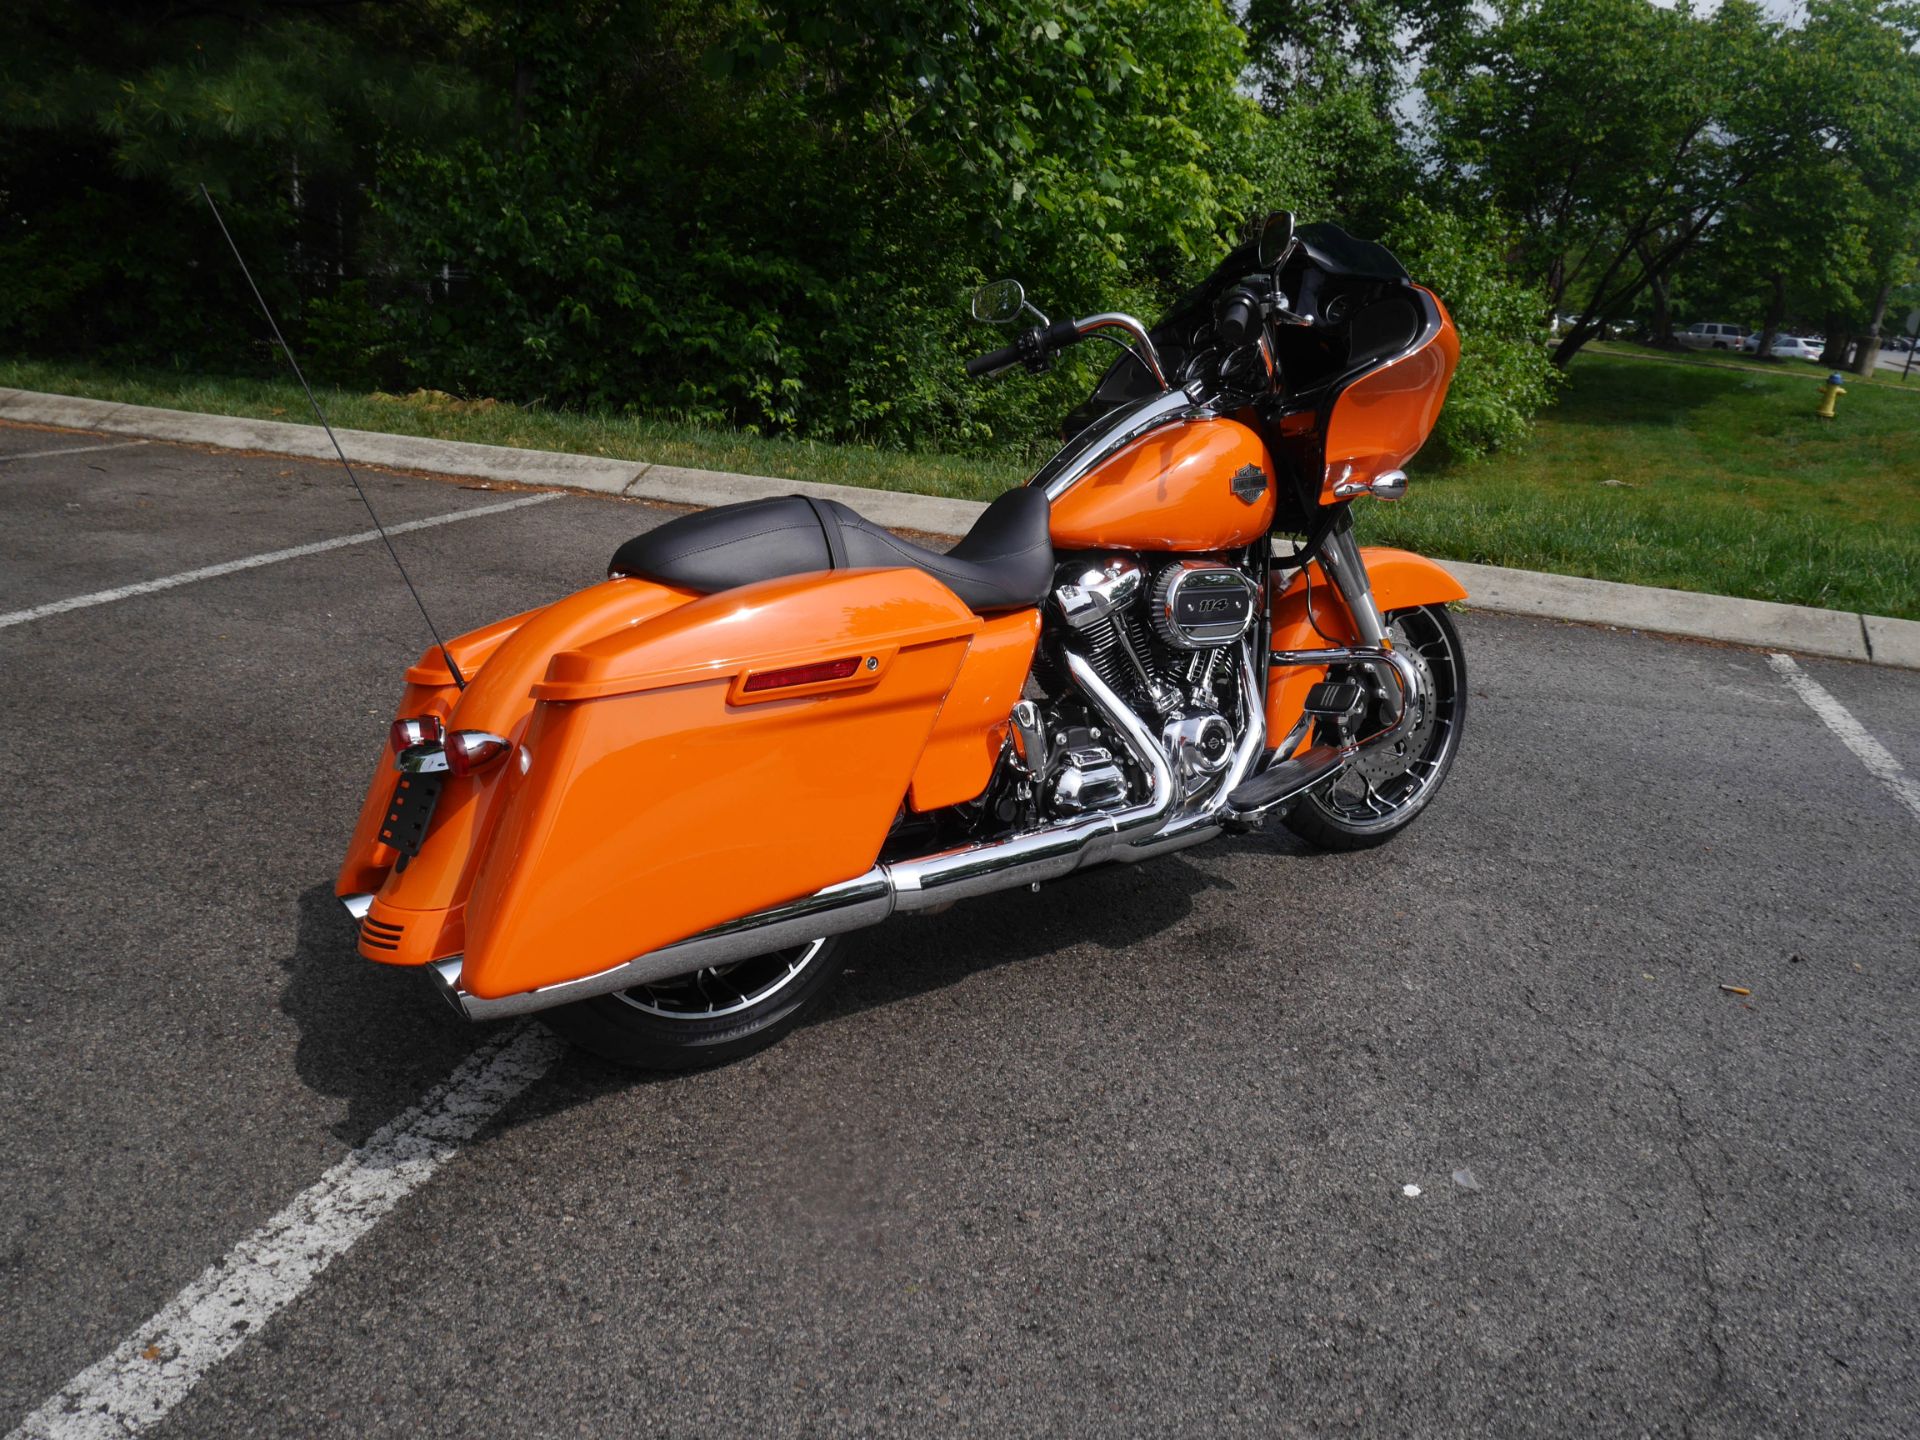 2023 Harley-Davidson Road Glide® Special in Franklin, Tennessee - Photo 12